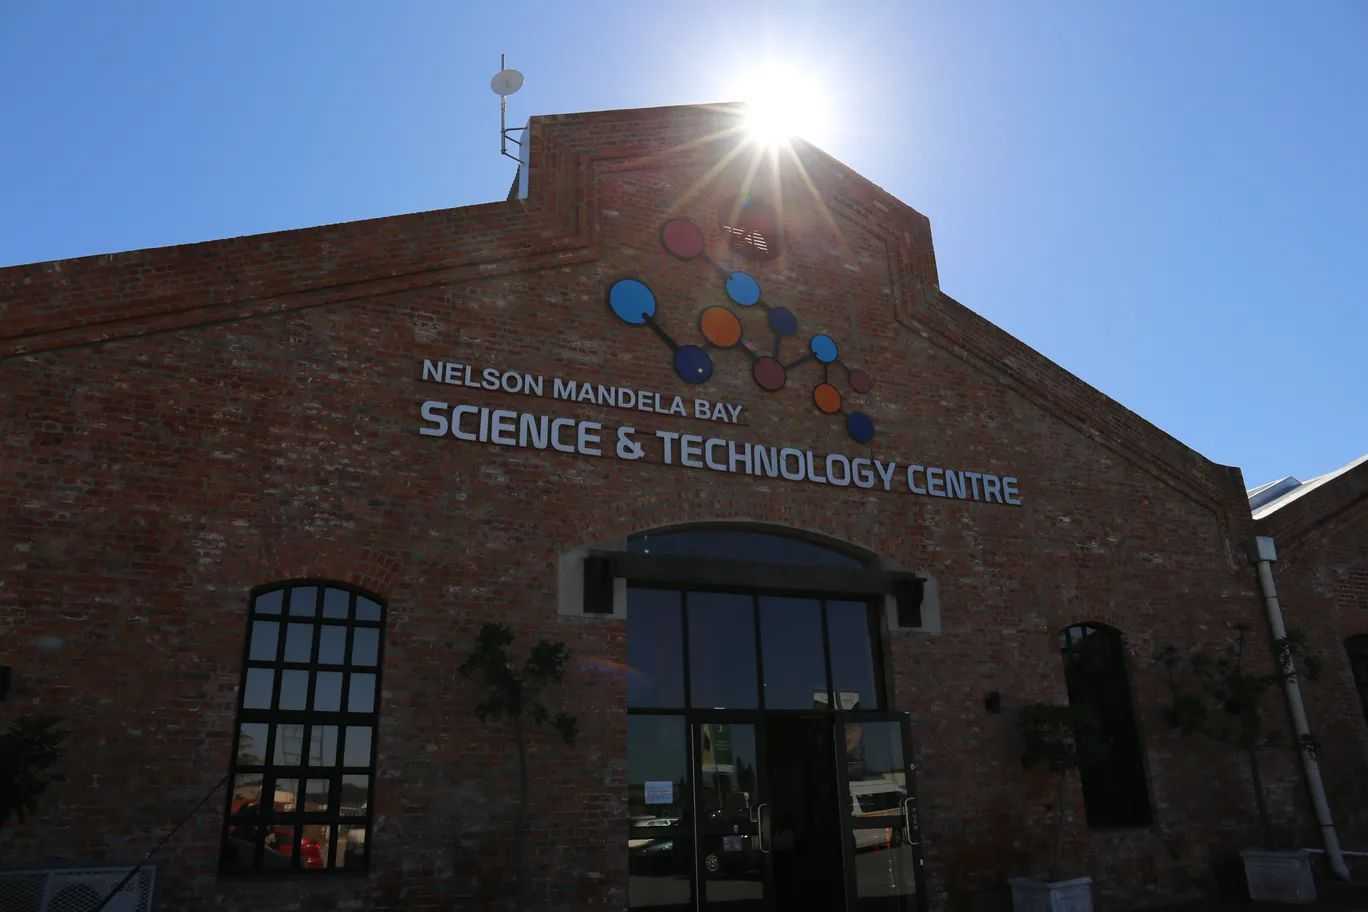 NMB Science and Technology Centre